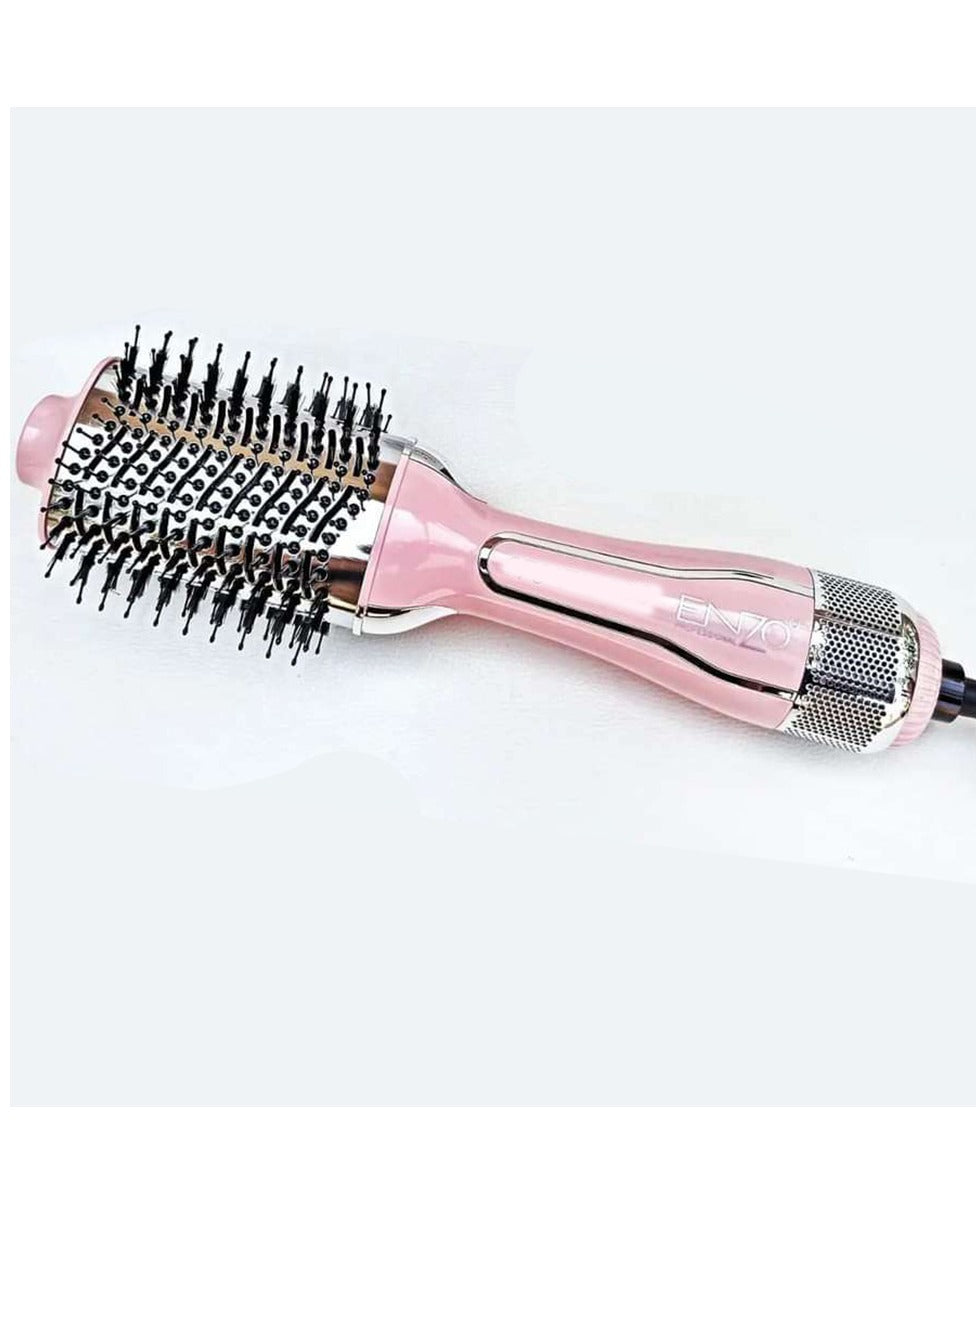 ENZO Hair Dryer dry and moisturize hair and reduce styling time Brush EN-4115